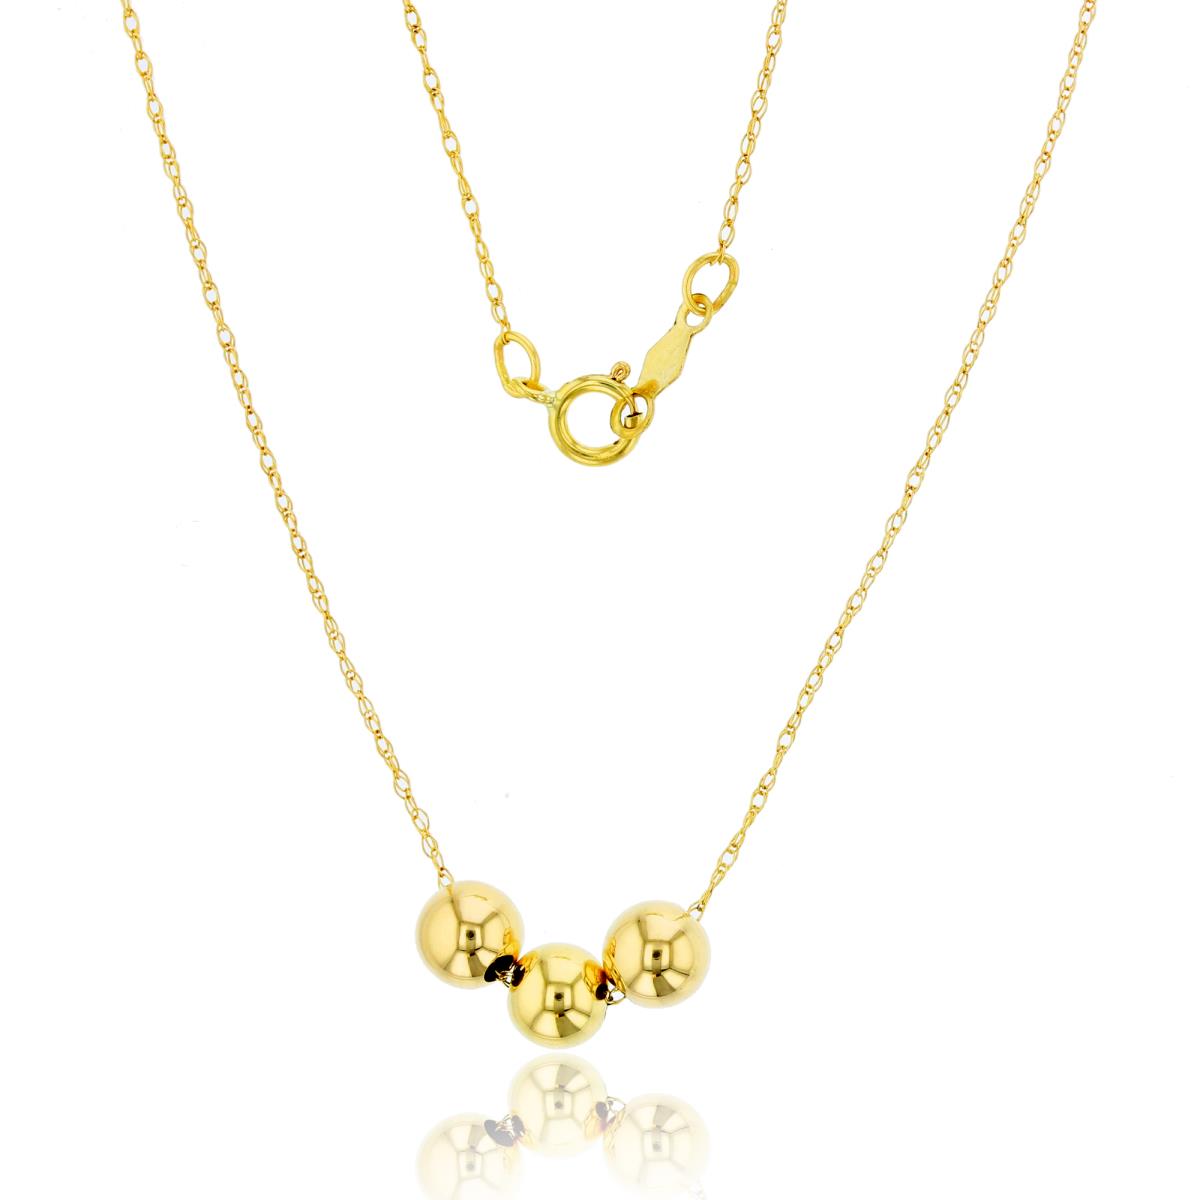 10K Yellow Gold 5.00mm Three Polished Bead Ball 18" Necklace